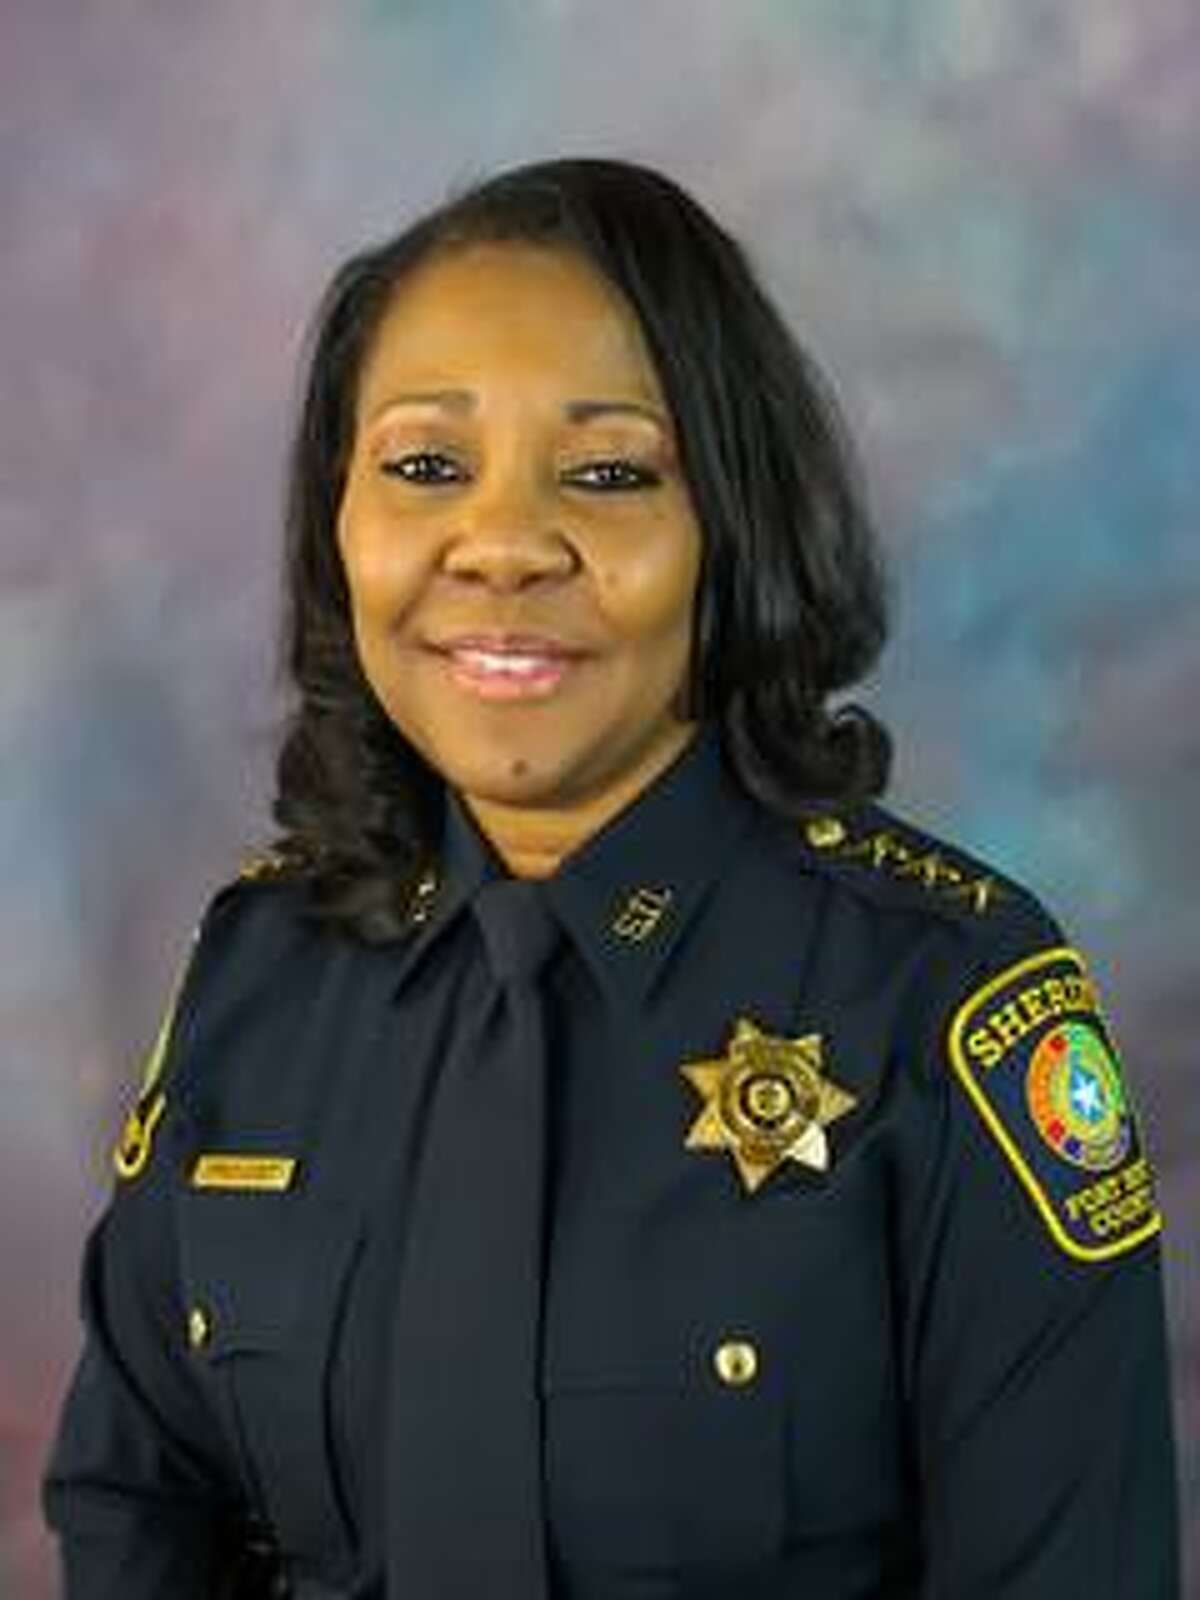 Chief Deputy Mattie C. Provost of the Fort Bend County Sheriff’s Office has been named the 2022 Melvin Drum Chief Deputy of the Year by the Texas Chief Deputies Association (TCDA).